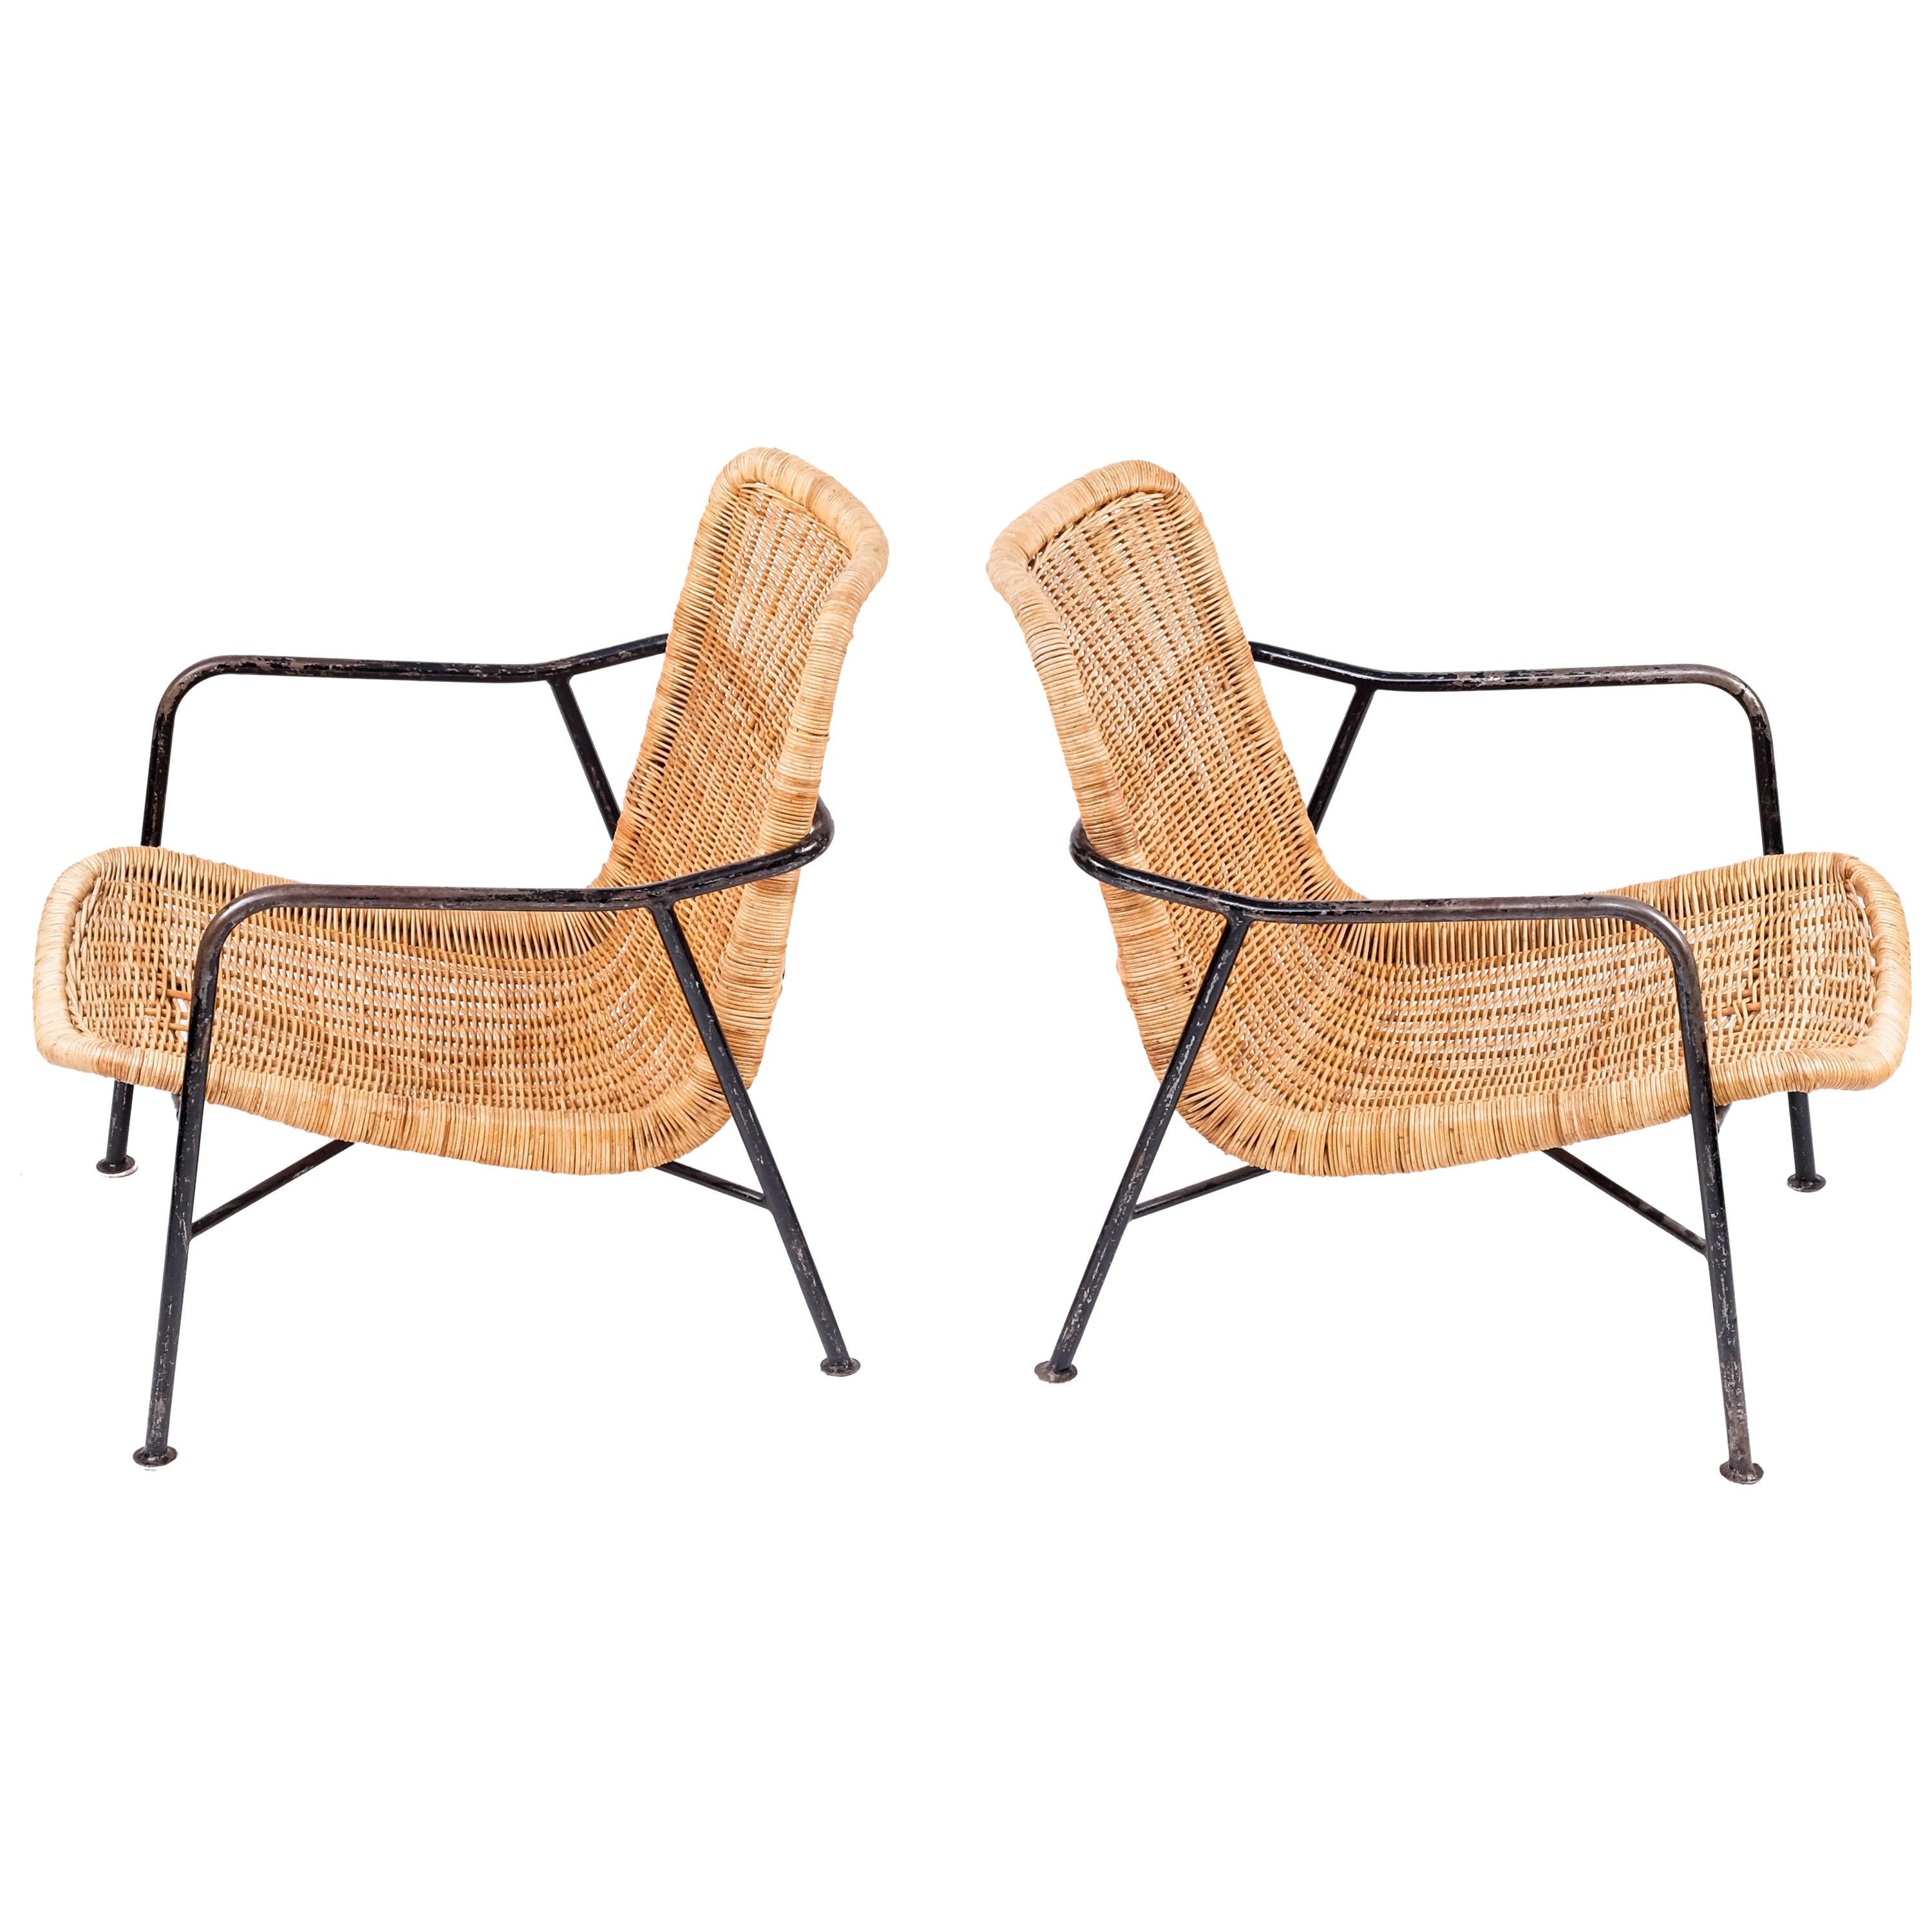 Rare Pair of Swedish Rattan Chairs, 1960s For Sale